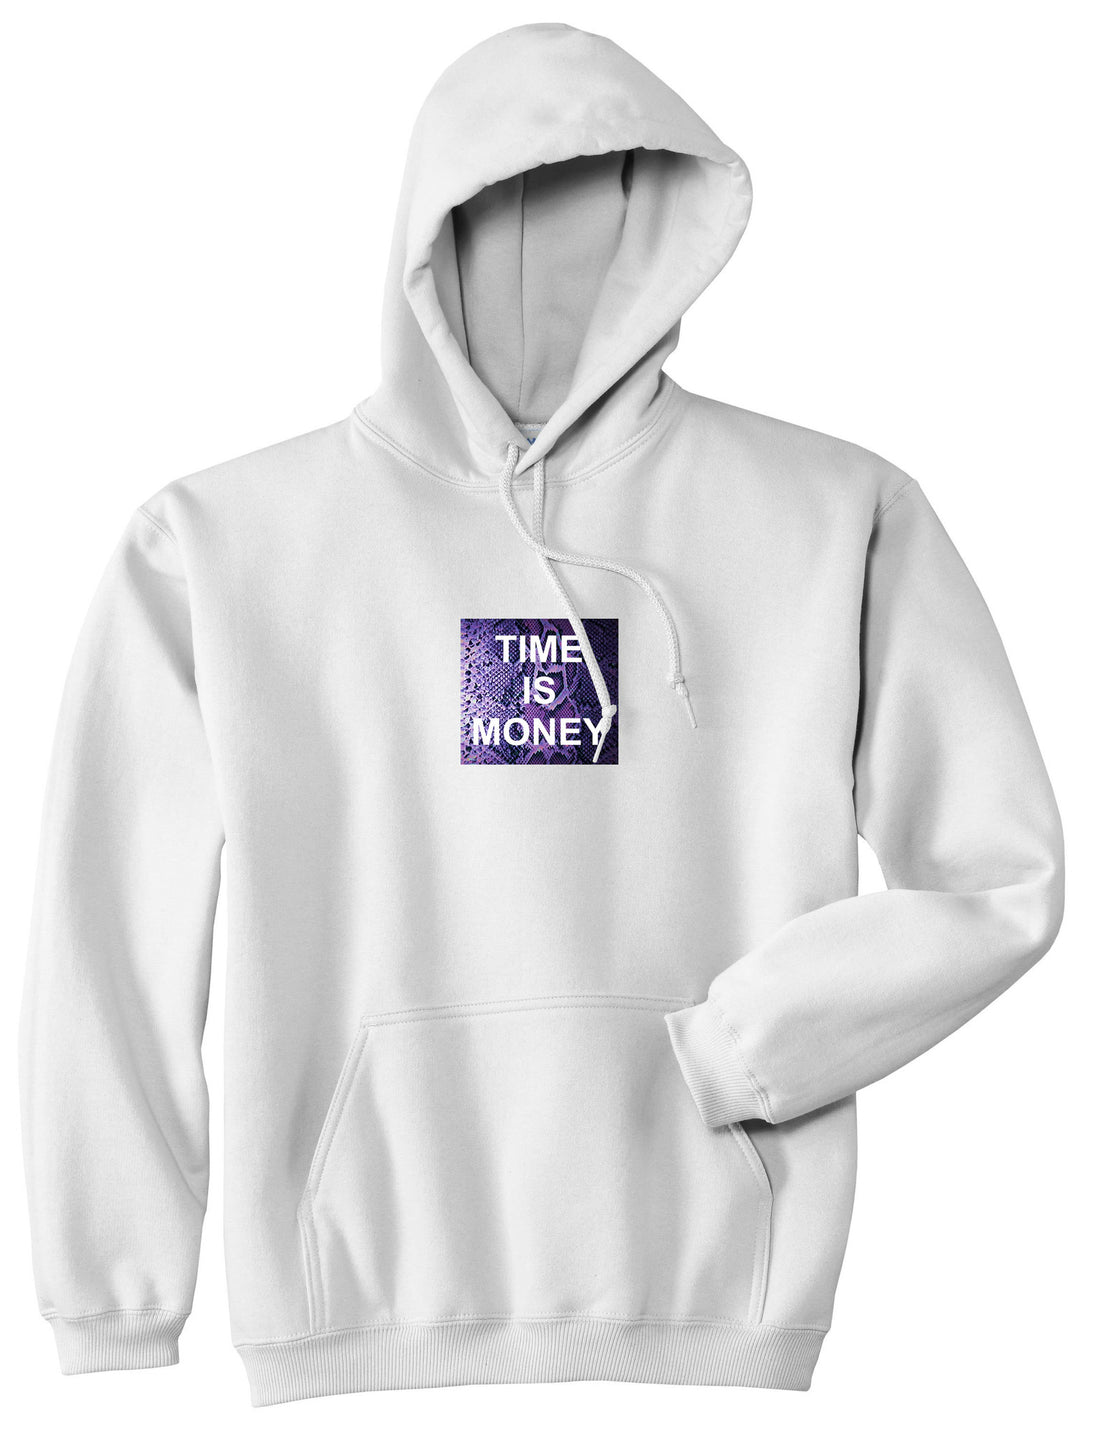 Time Is Money Snakesin Print Boys Kids Pullover Hoodie Hoody in White By Kings Of NY